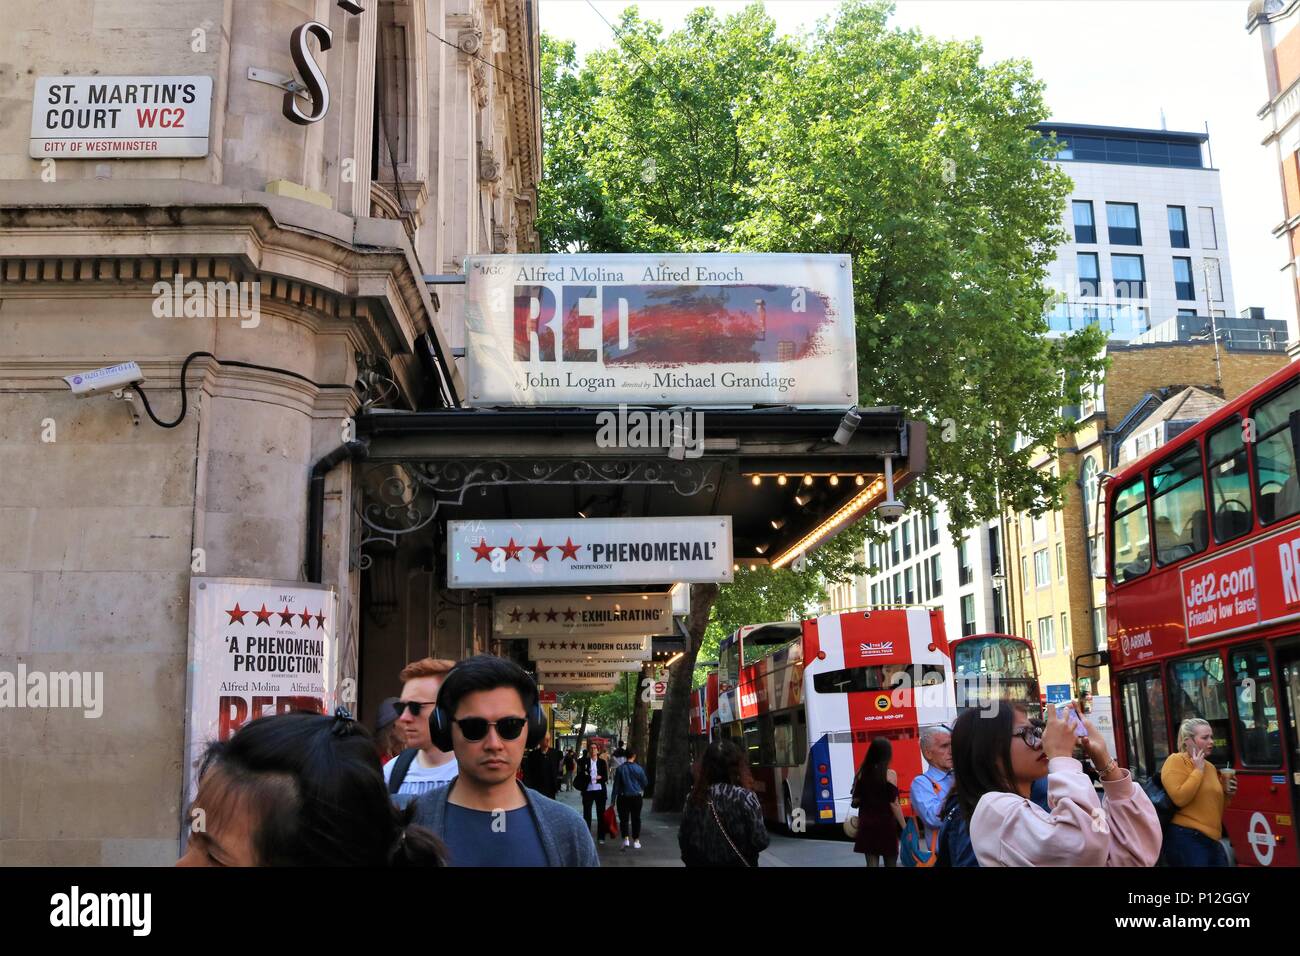 Wyndham's Theatre, St Martin's Court, London, UK showing Red the play with people walking around in the sunshine.  Theatre and tourism area. Stock Photo